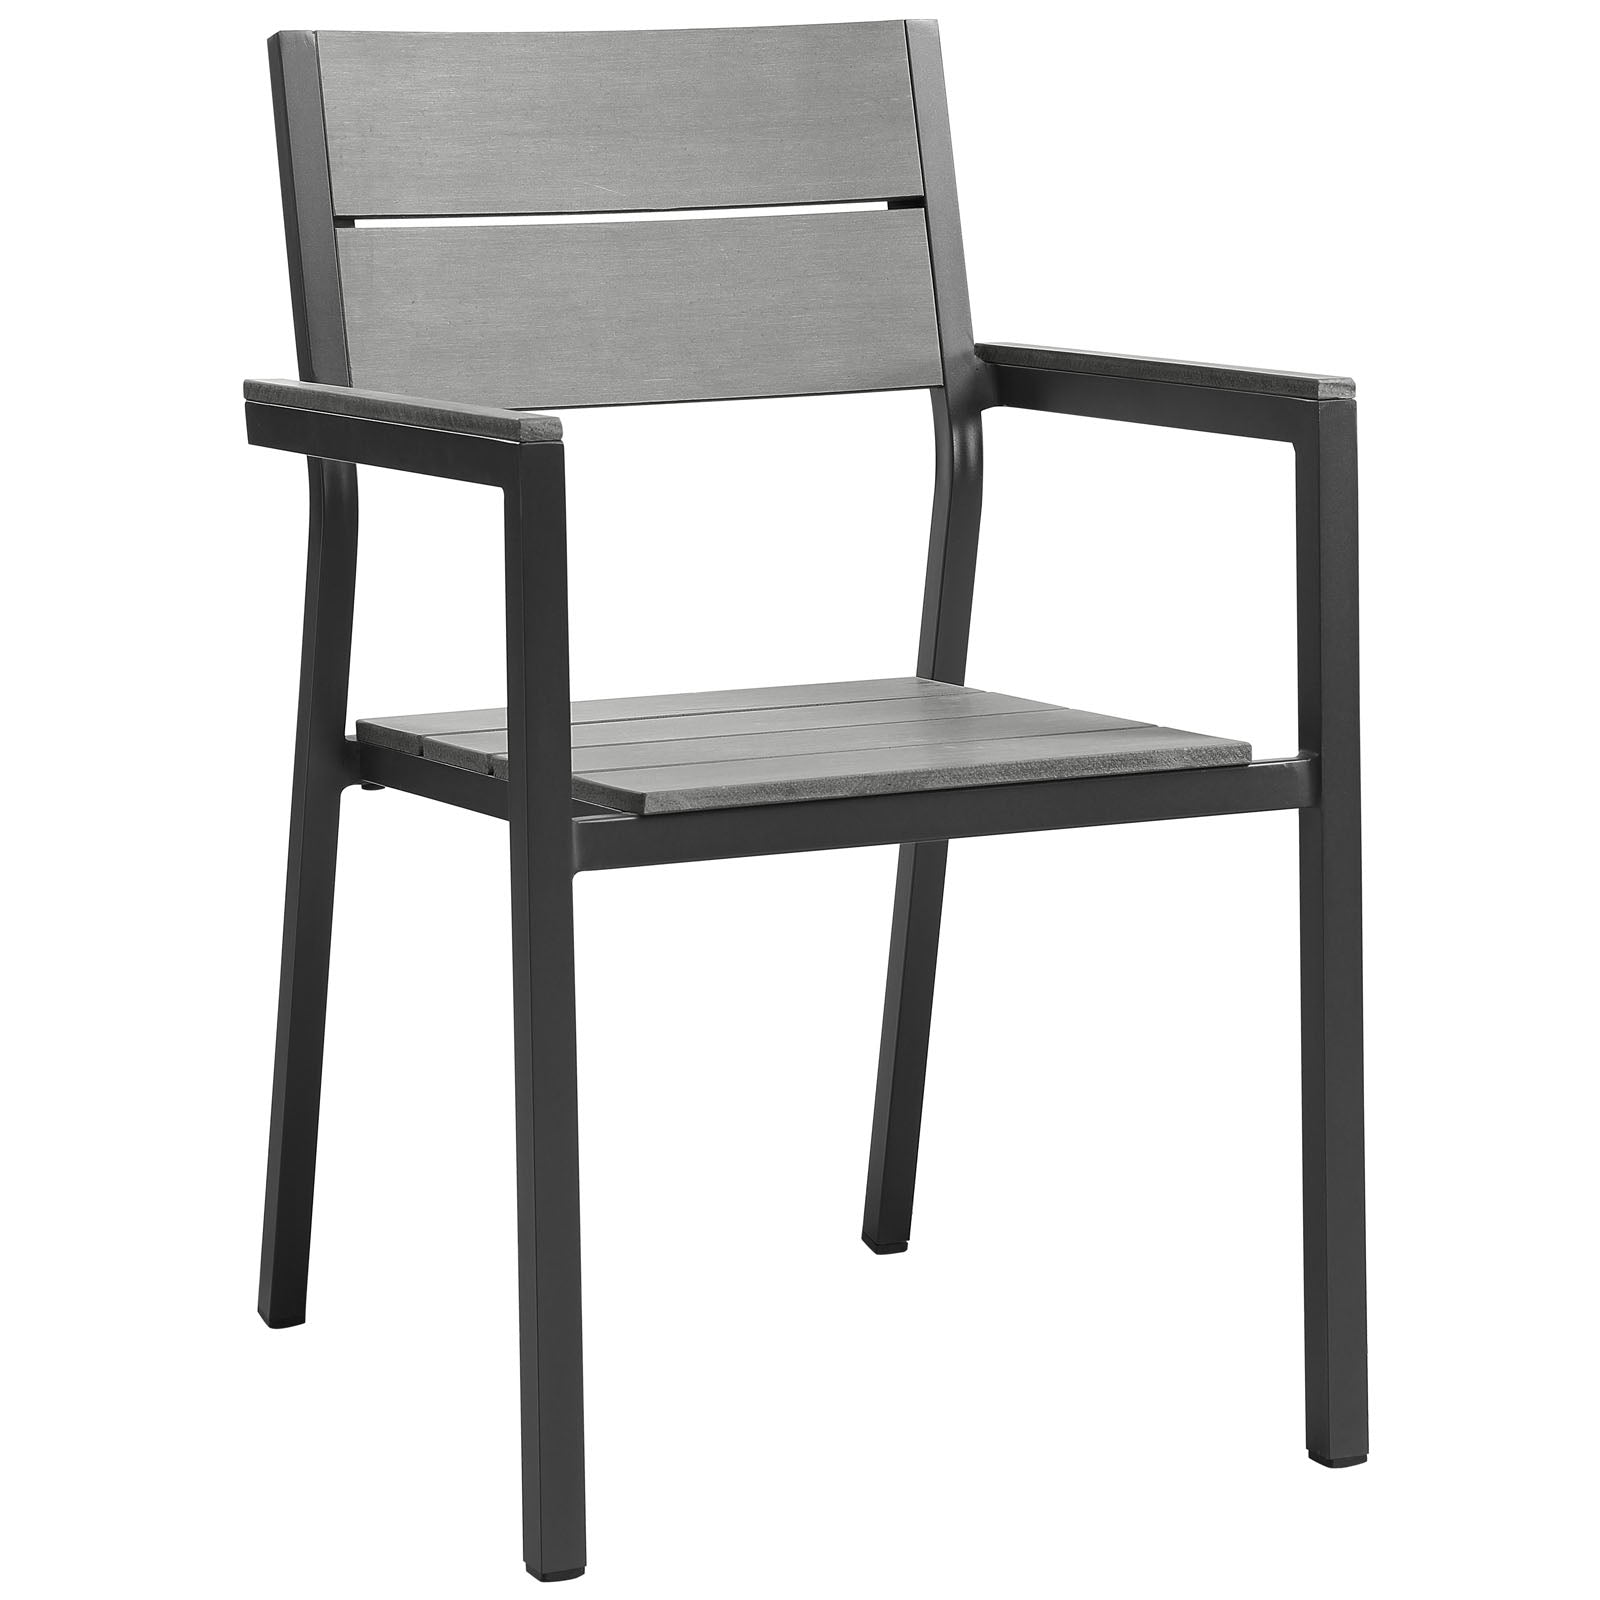 Modway Outdoor Chairs - Maine Dining Chair Dark Brown & Gray